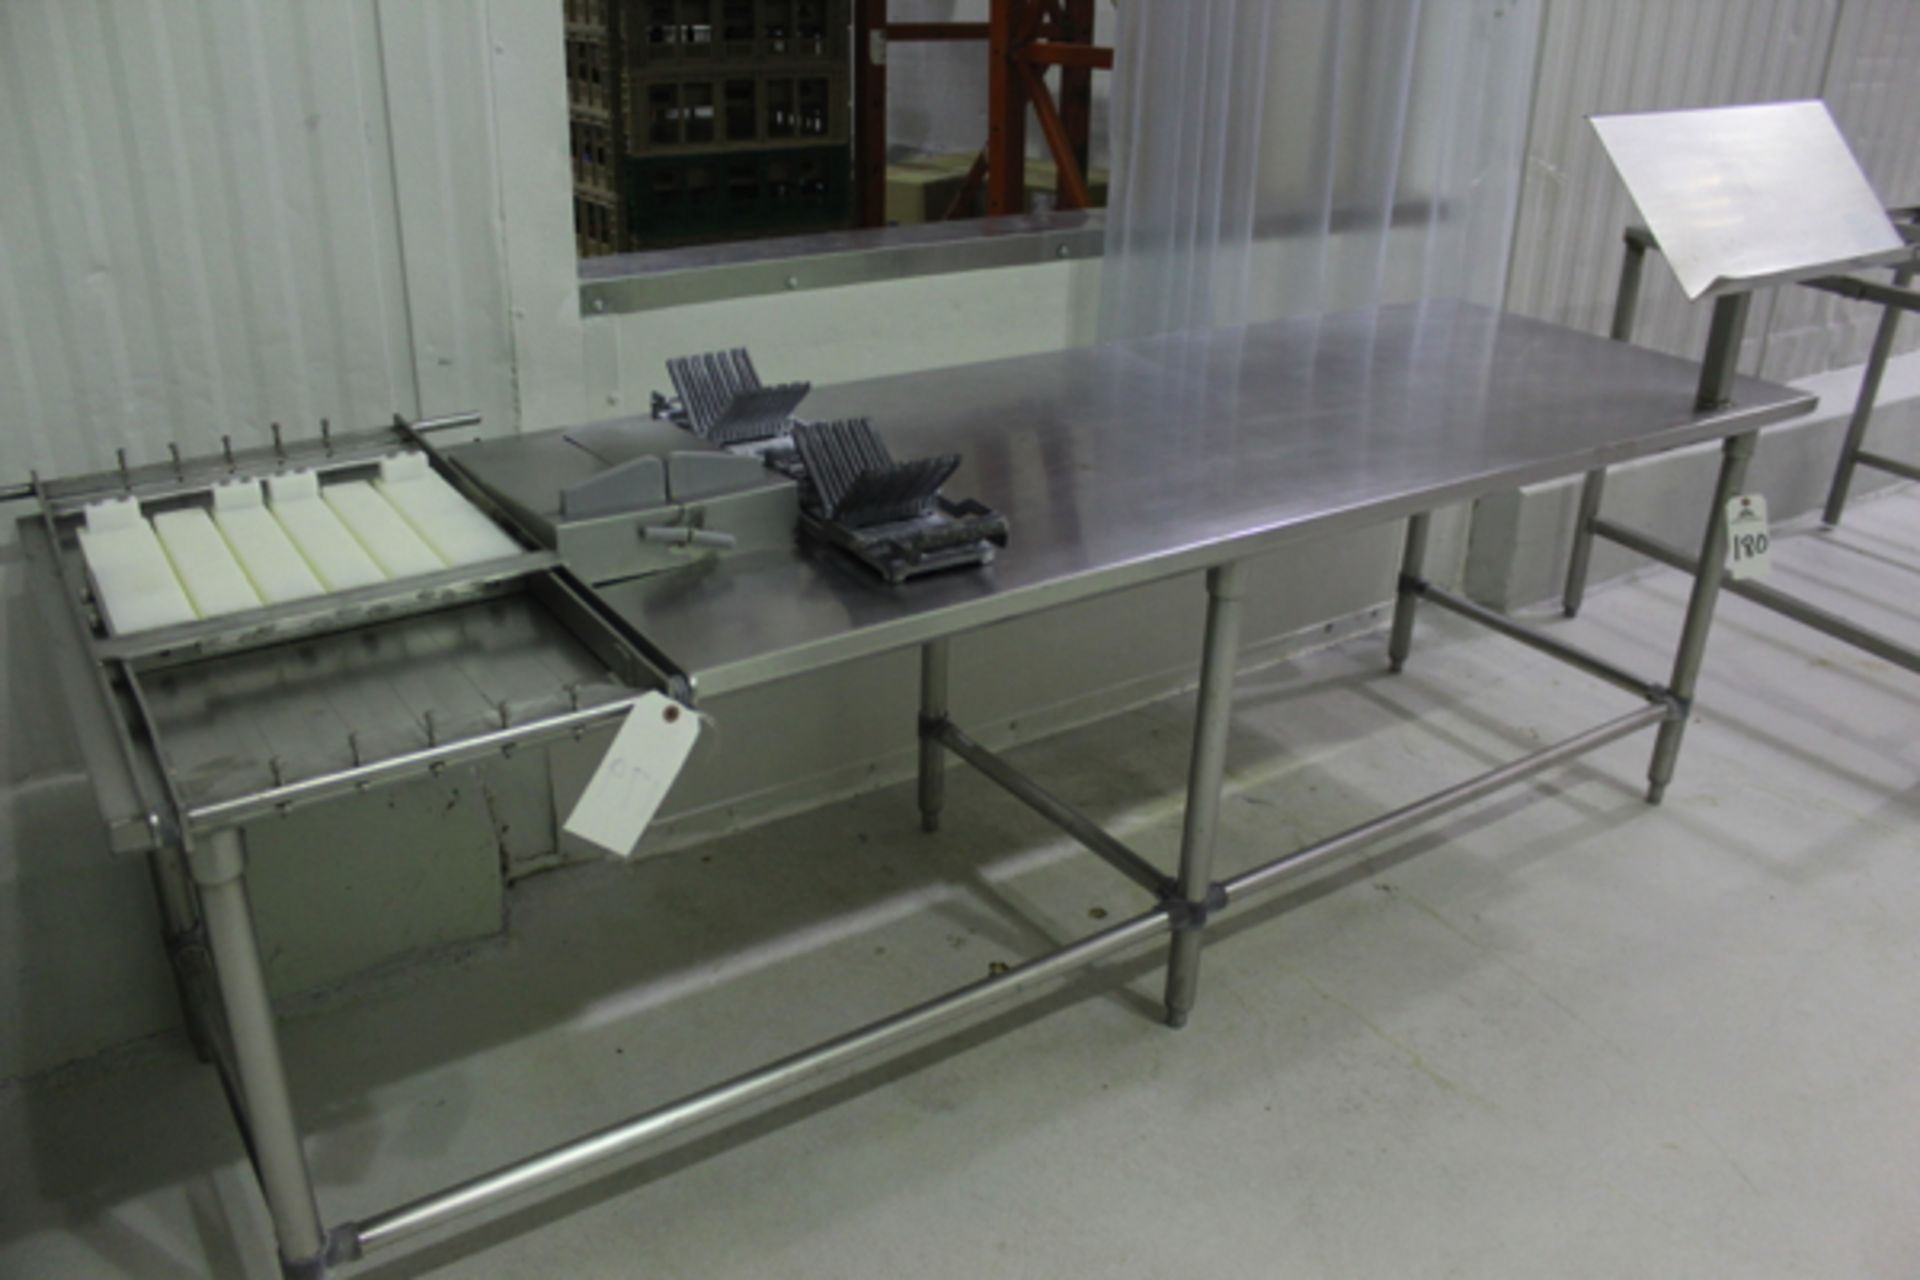 Stainless Steel Prep Table, 30" X 8' | Rigging Price: $25 or May Hand Carry